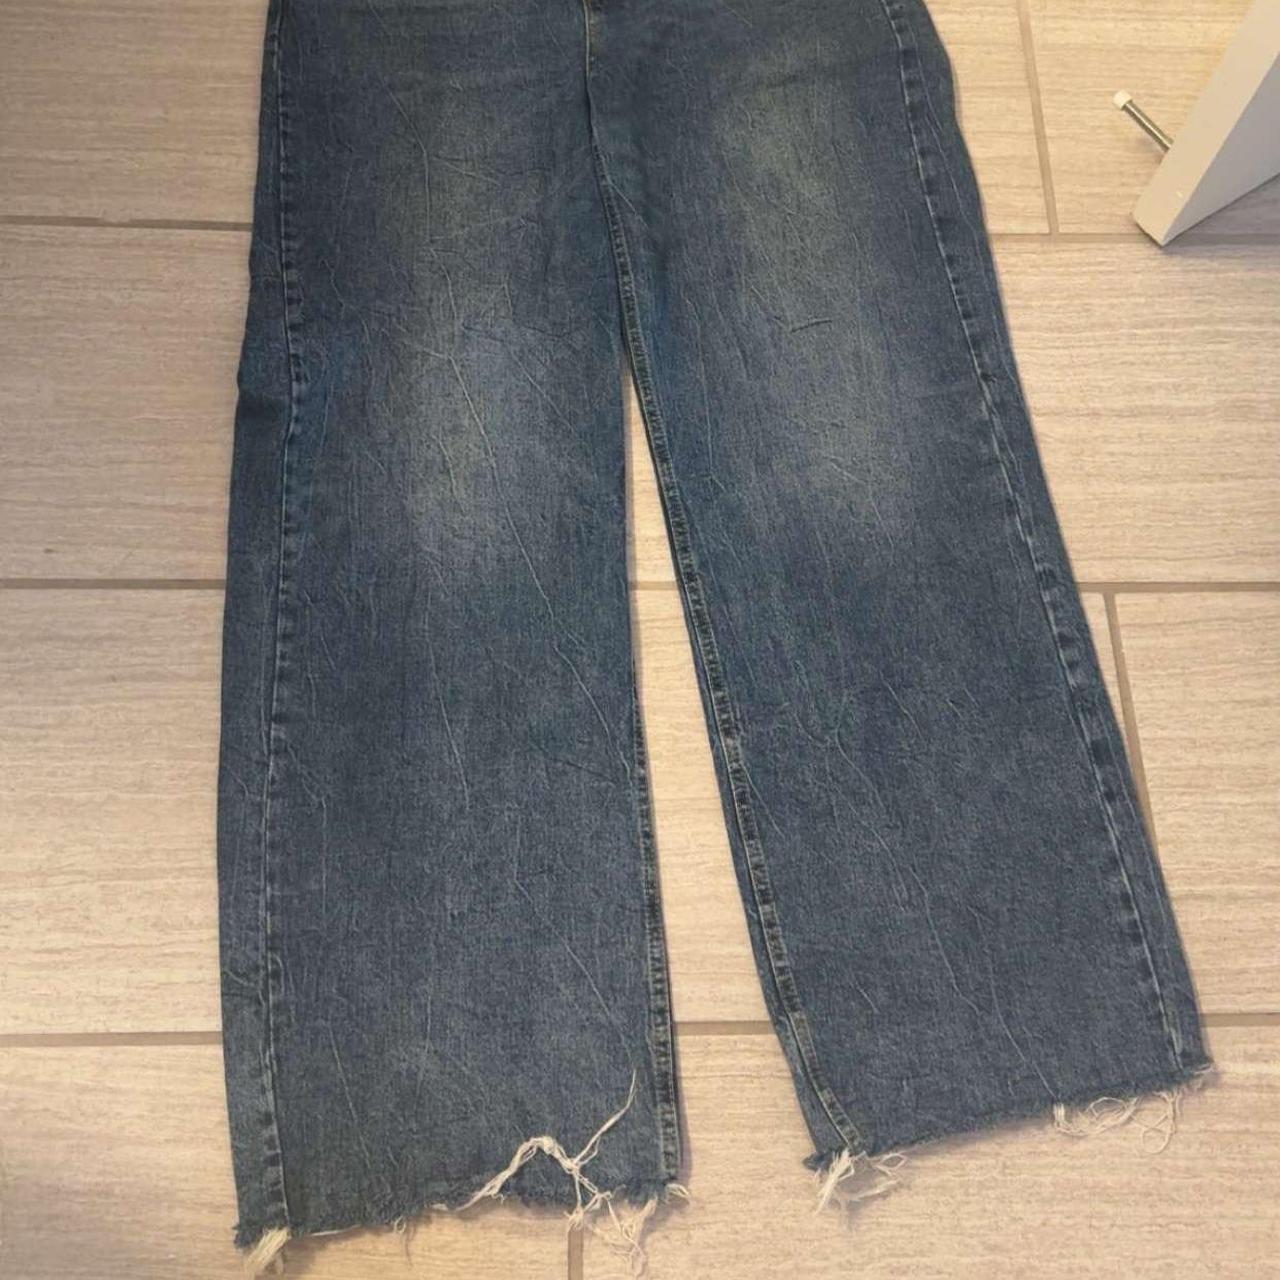 Baggy jeans Old navy Like 38 waist Size 18 Tall 11... - Depop